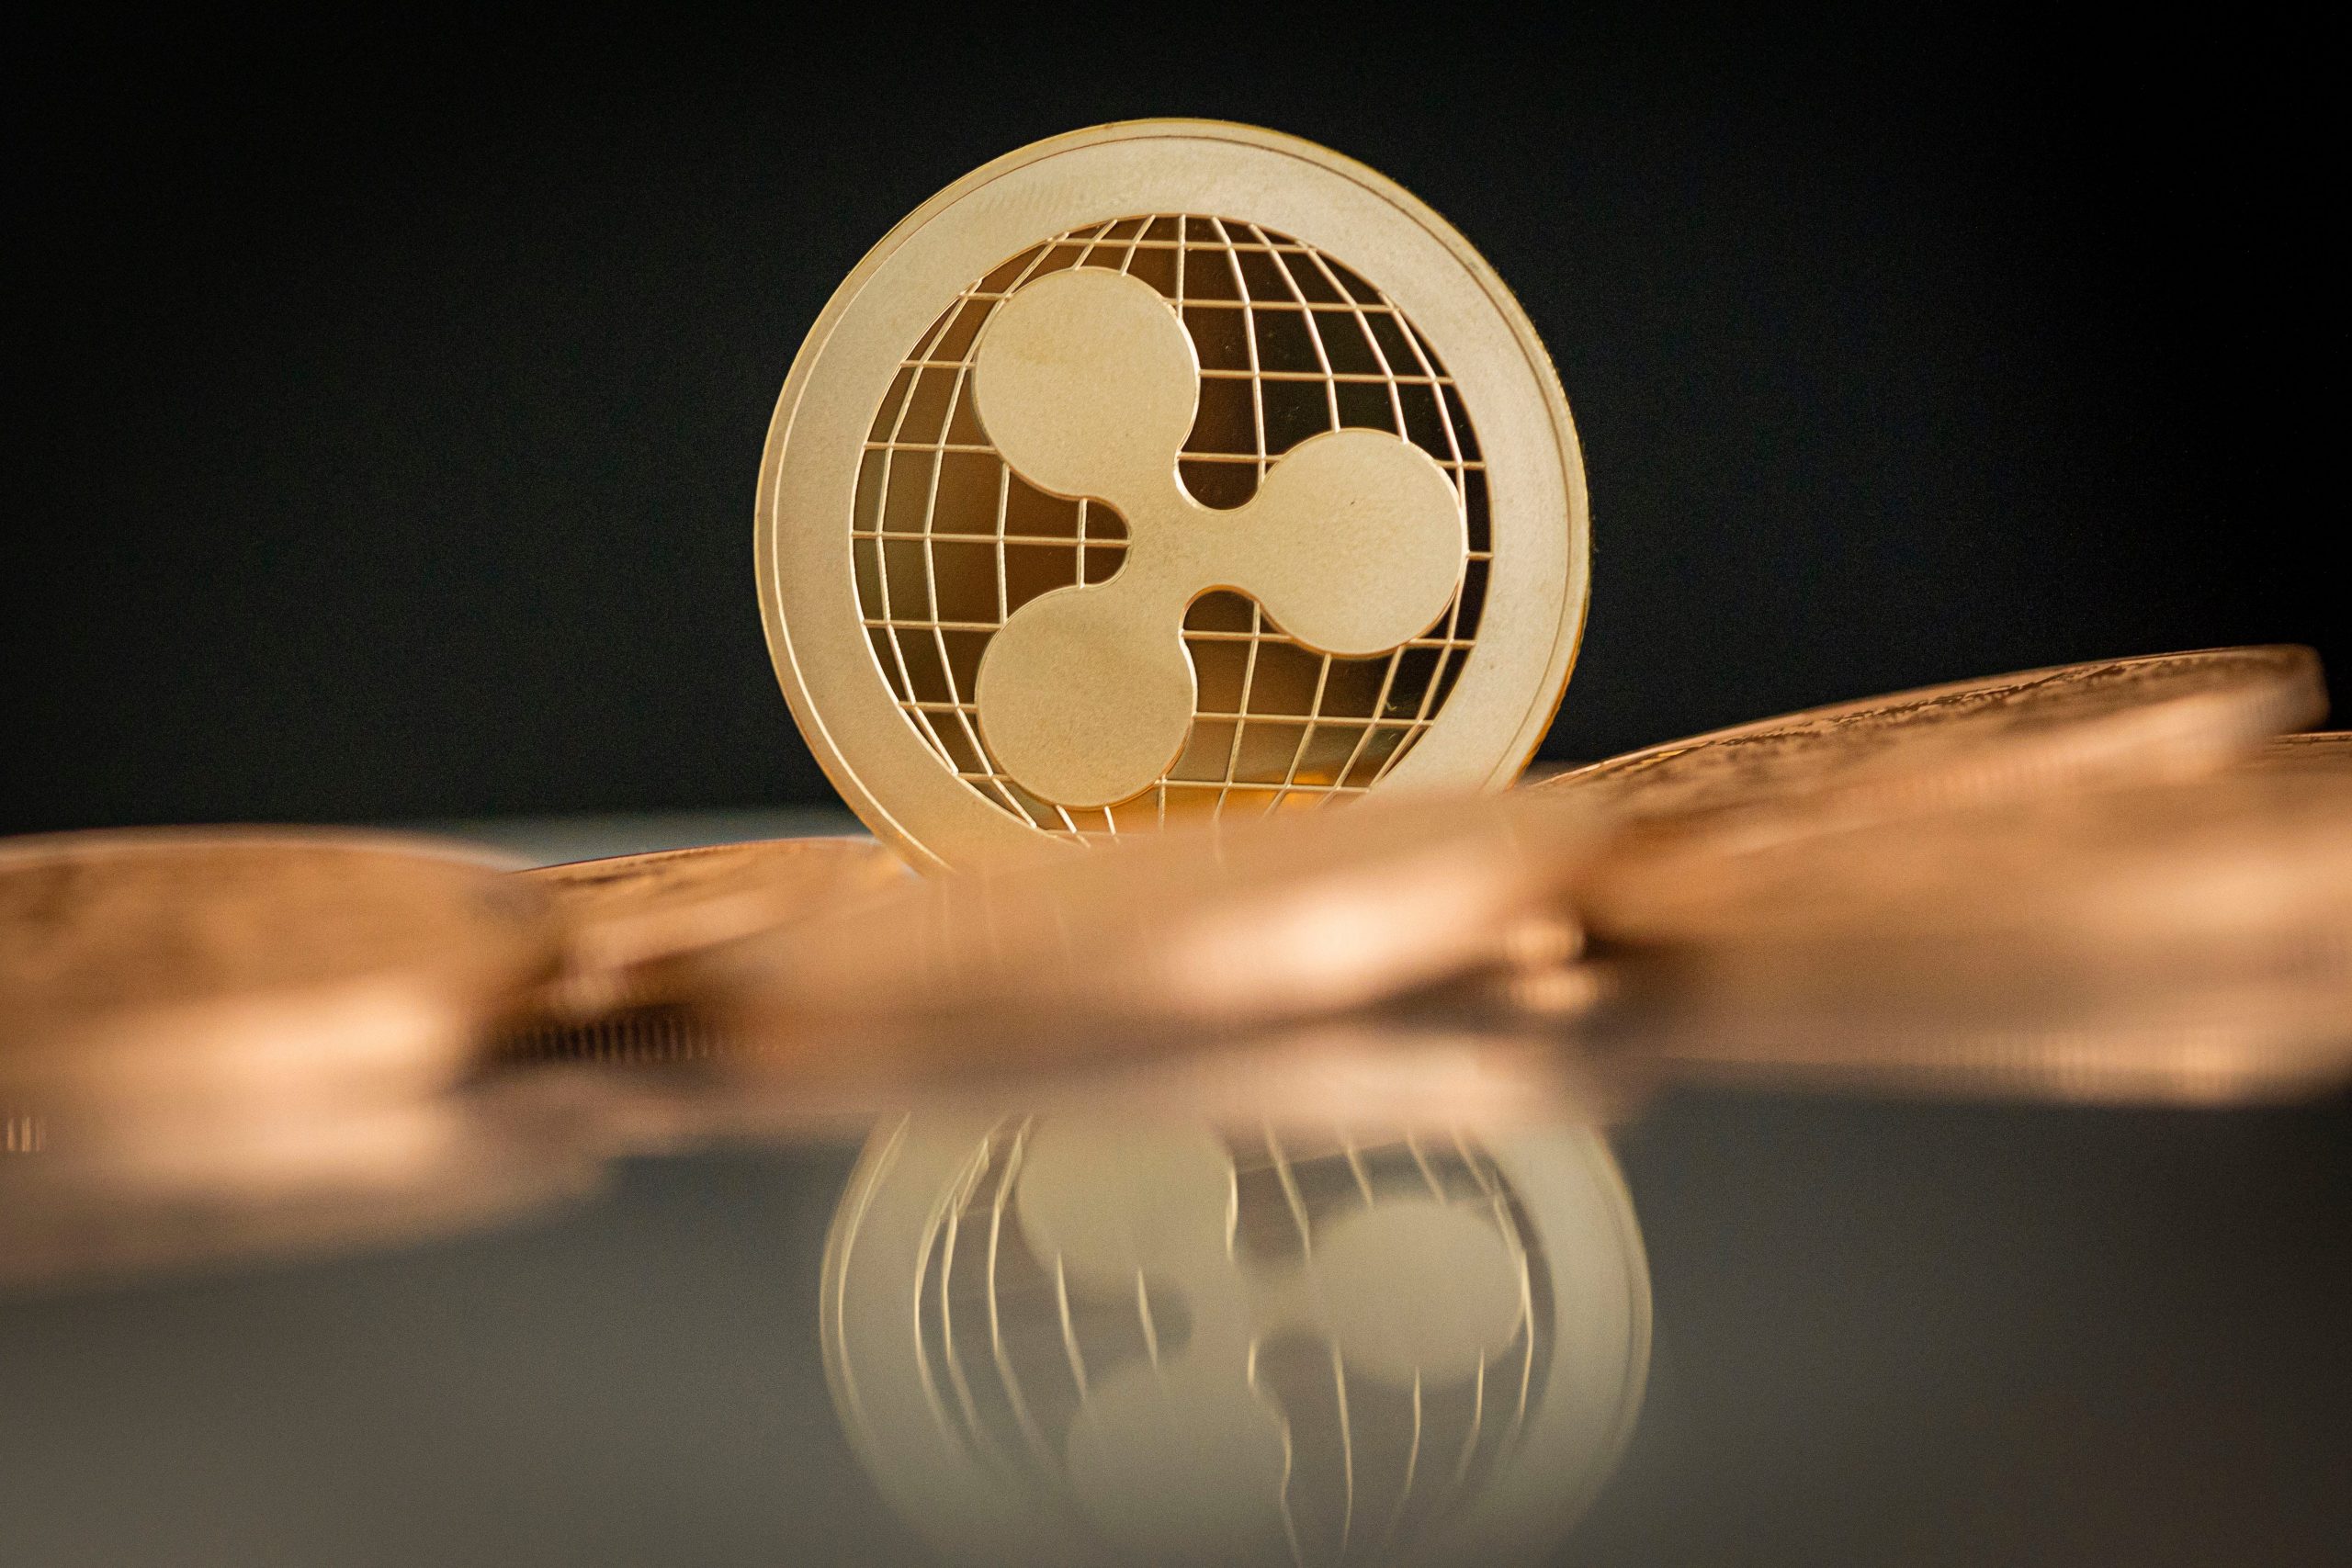 Ripple's XRP token has fallen more than 30% after the SEC ...